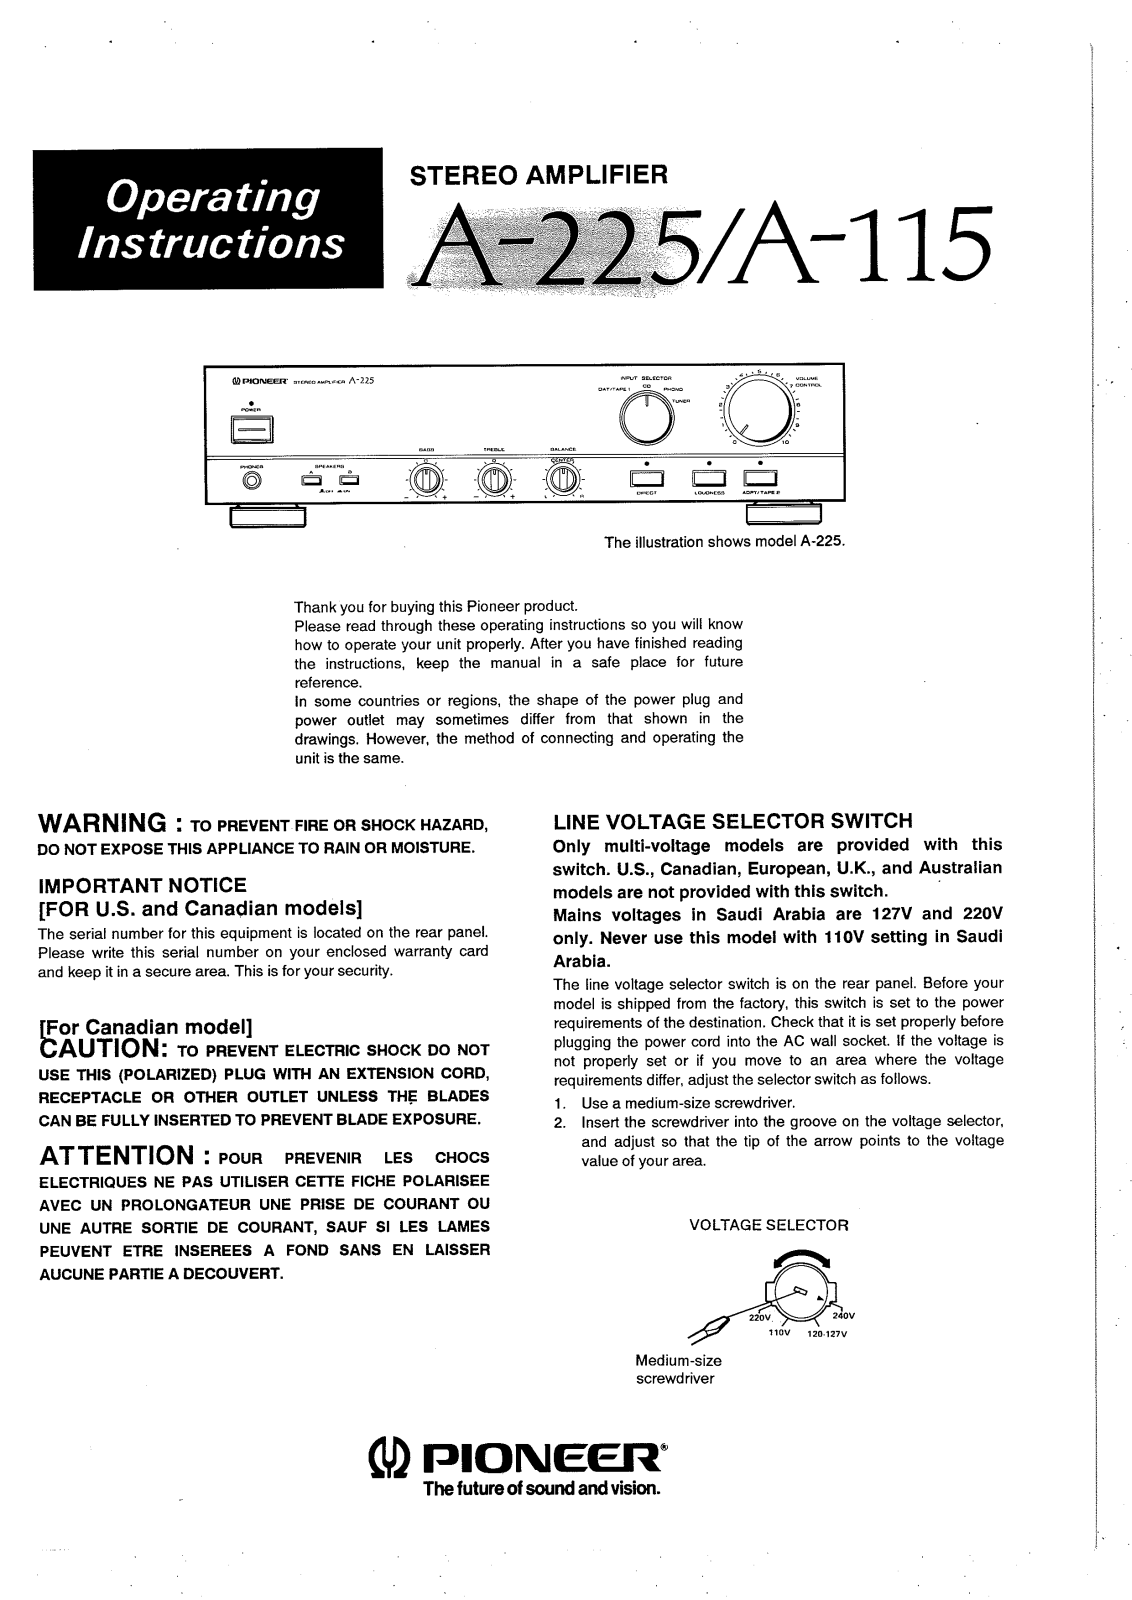 Pioneer A-225, A-115 Owners manual